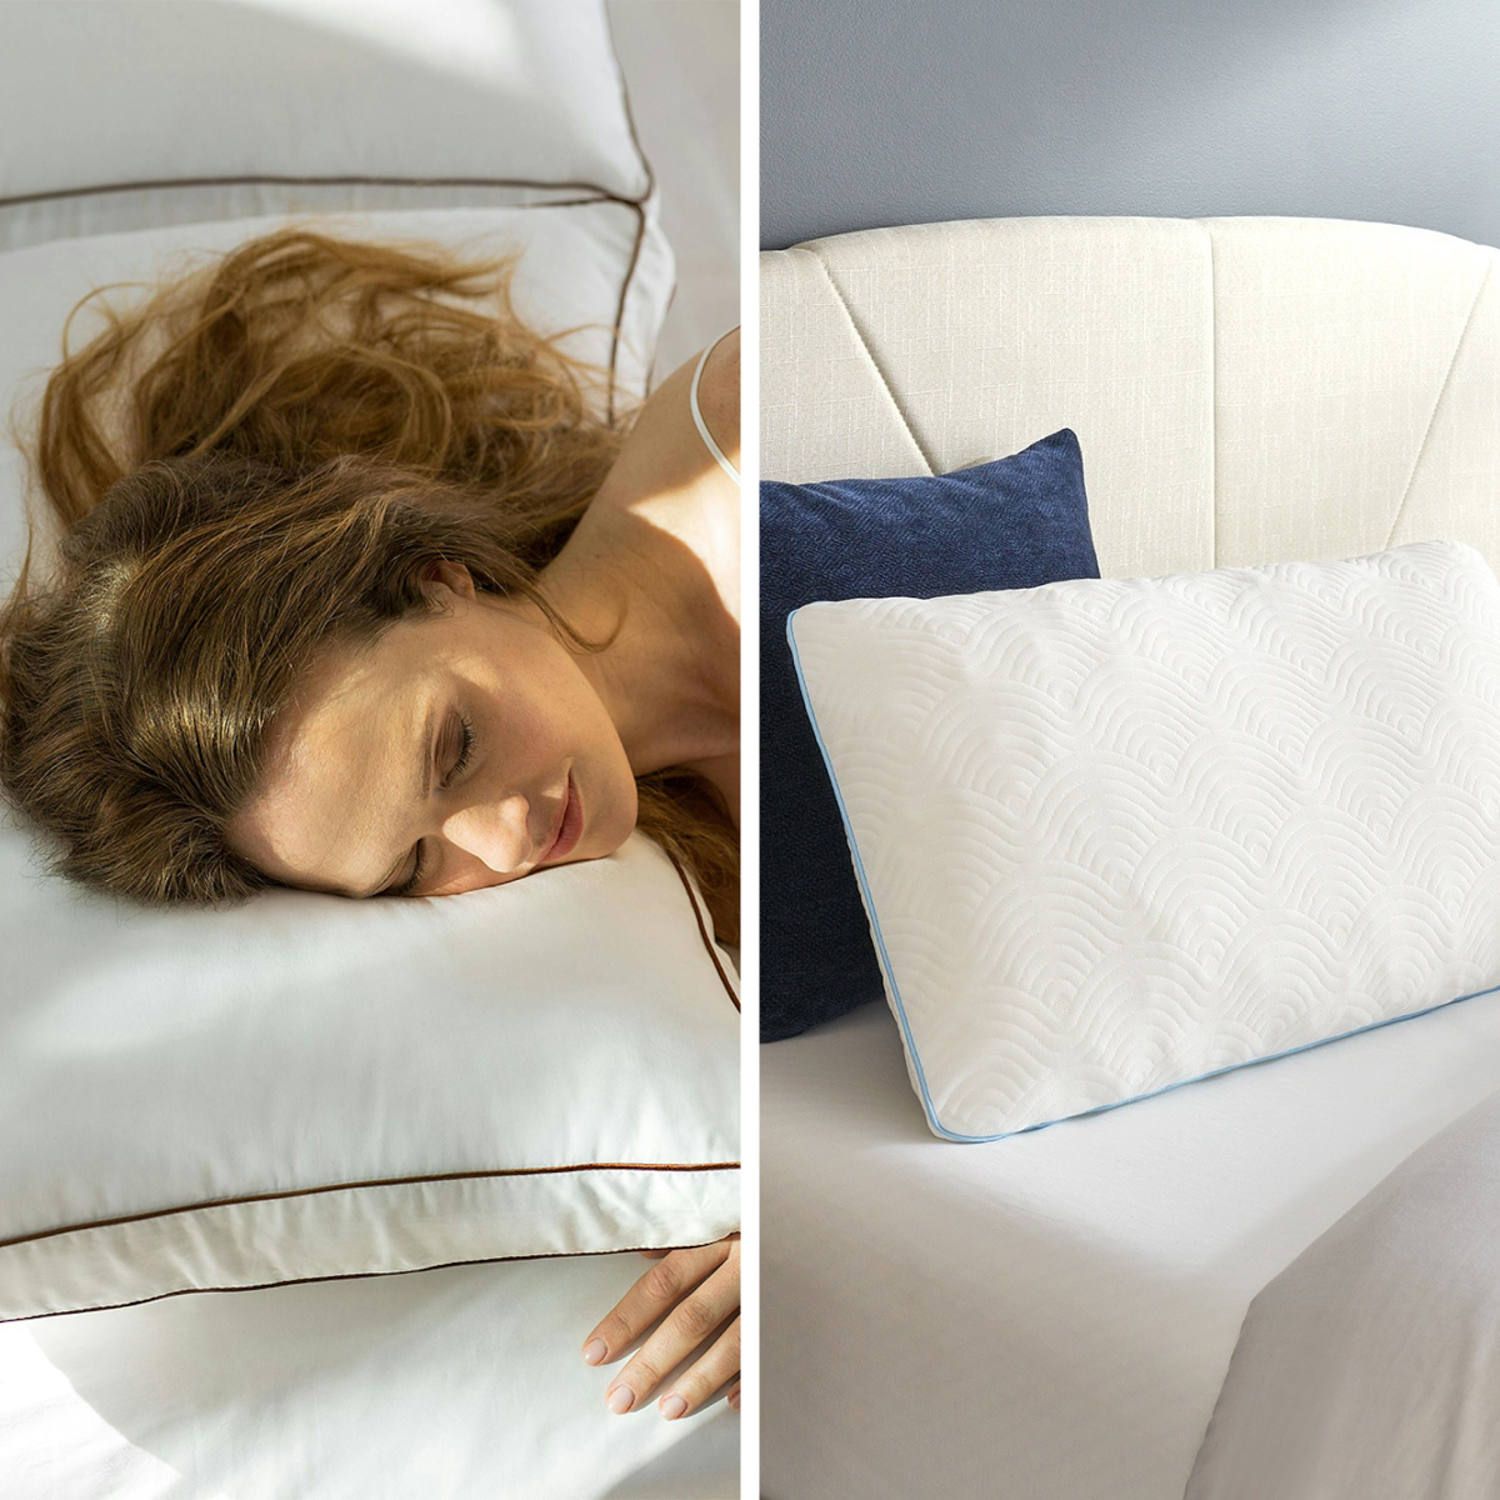 The 5 best pillows to relieve neck pain